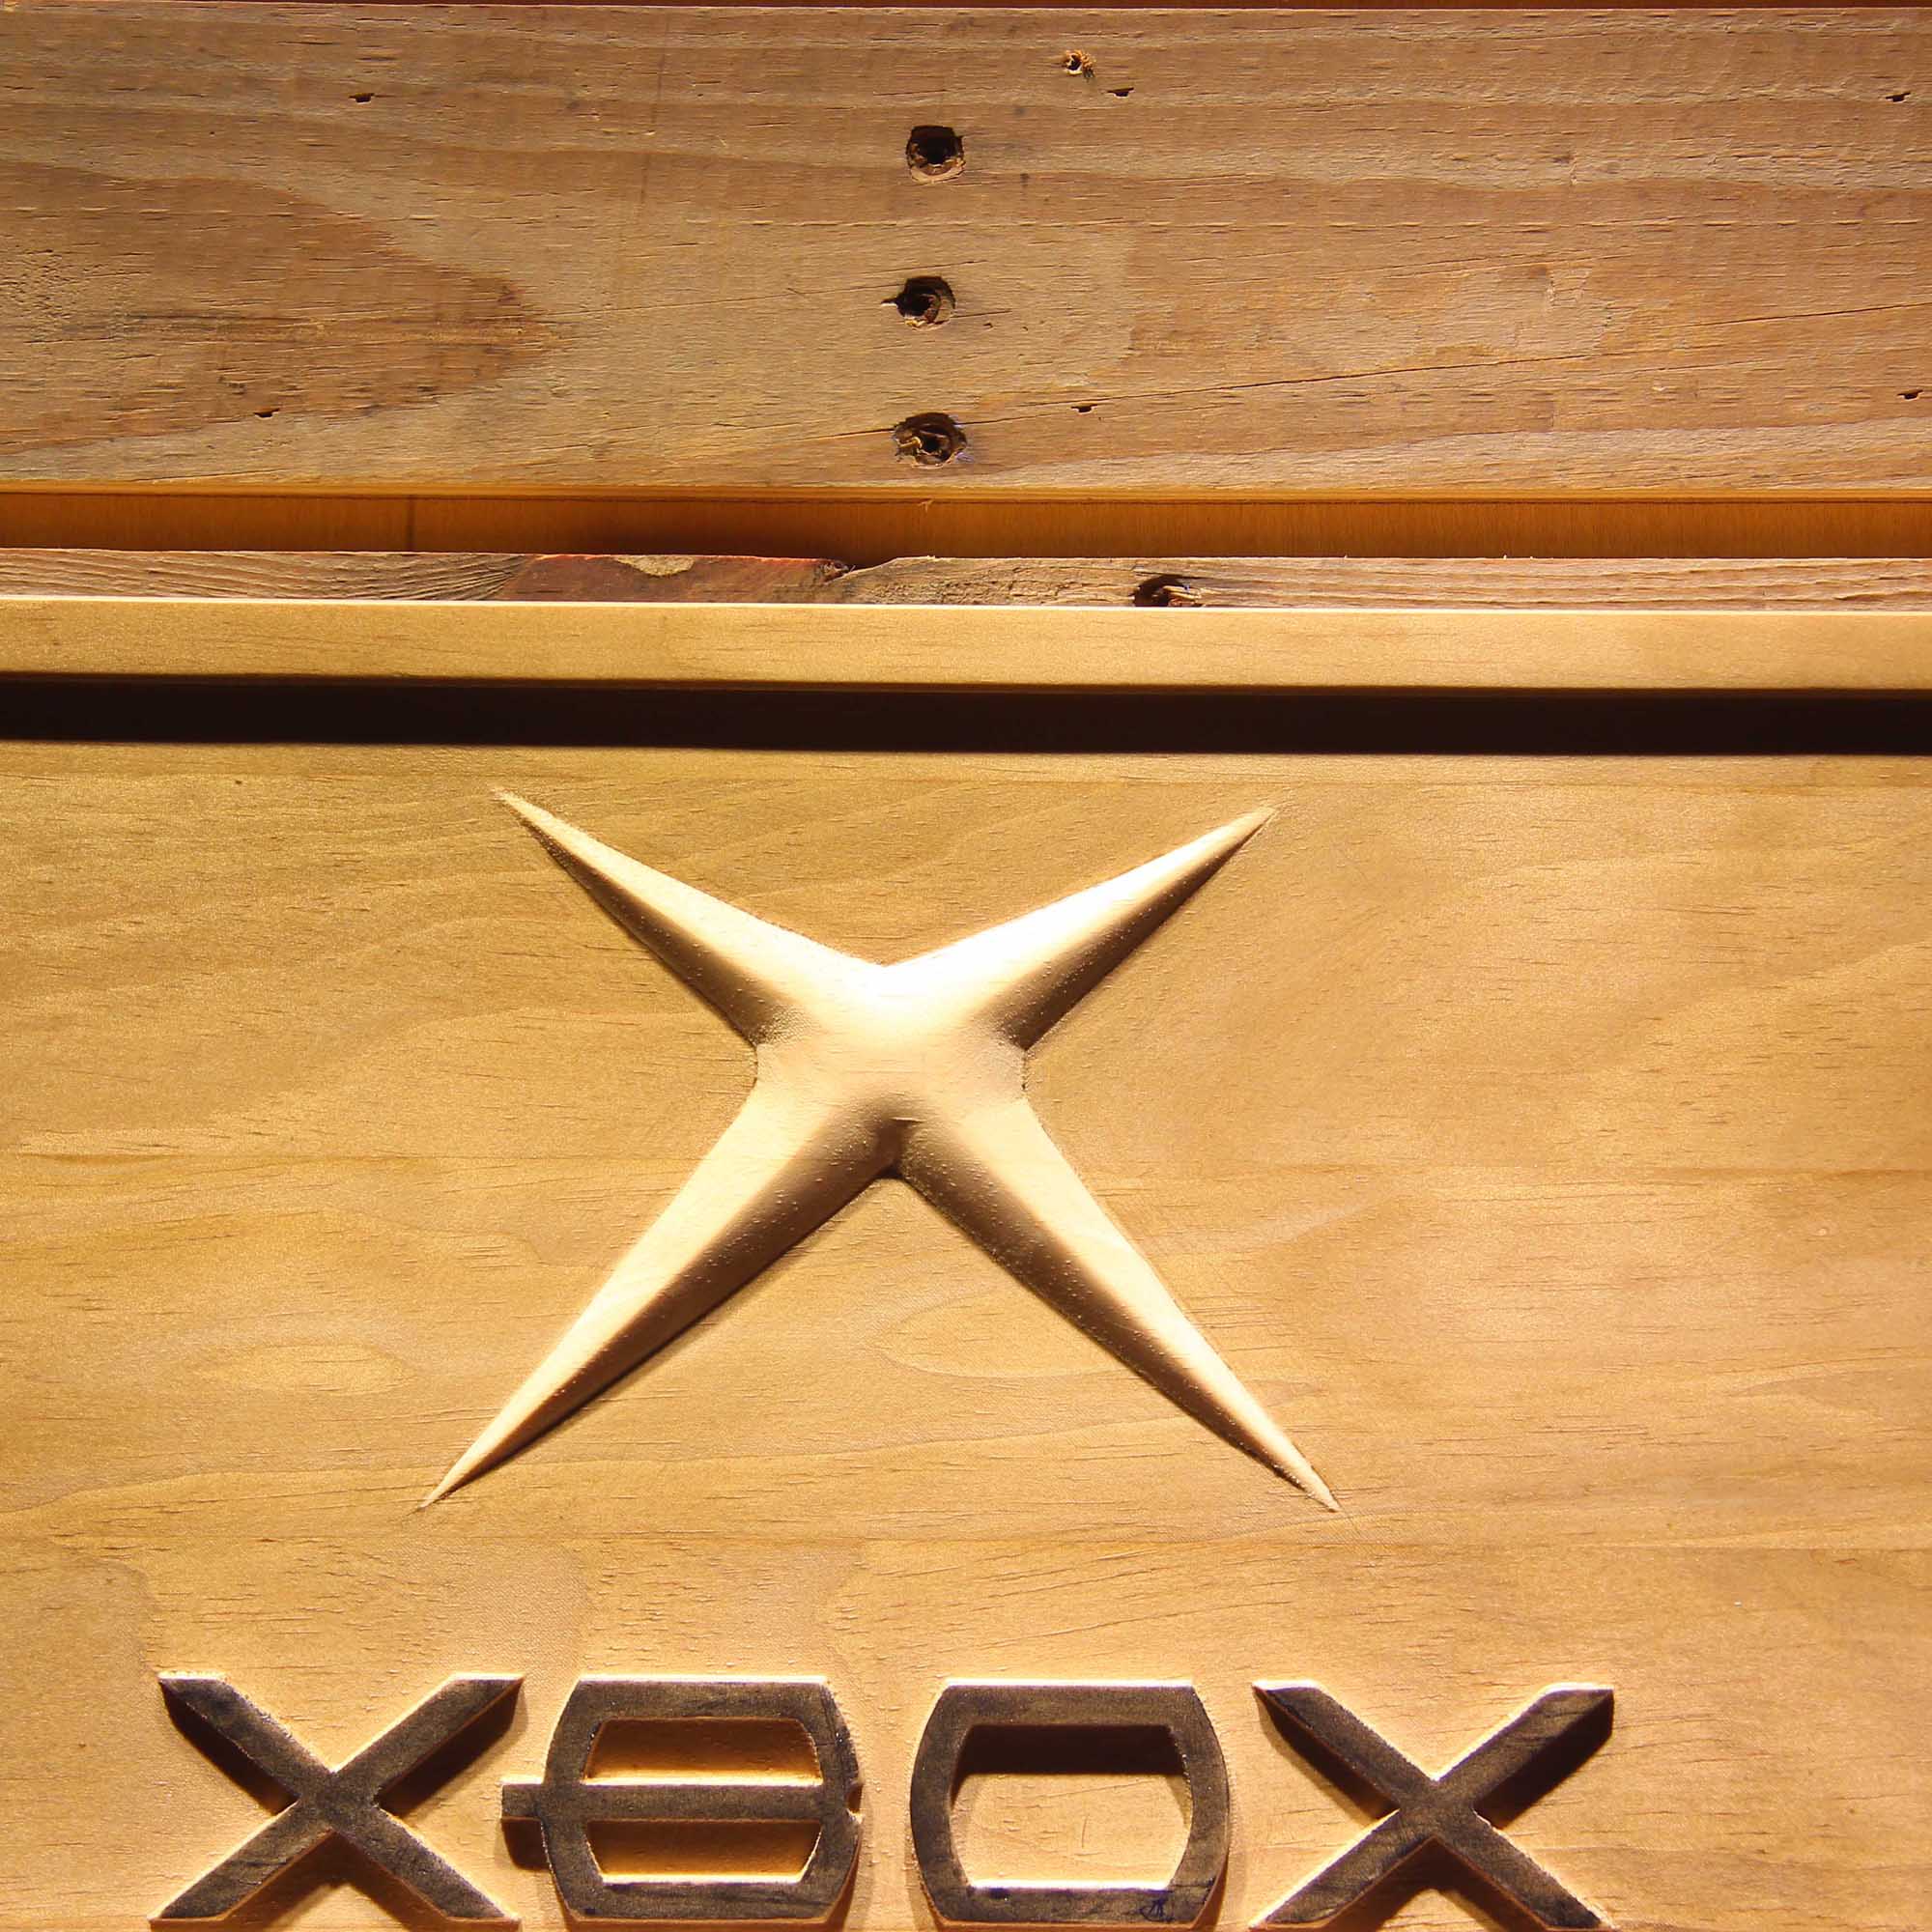 Xbox Game Room 3D Wooden Engrave Sign